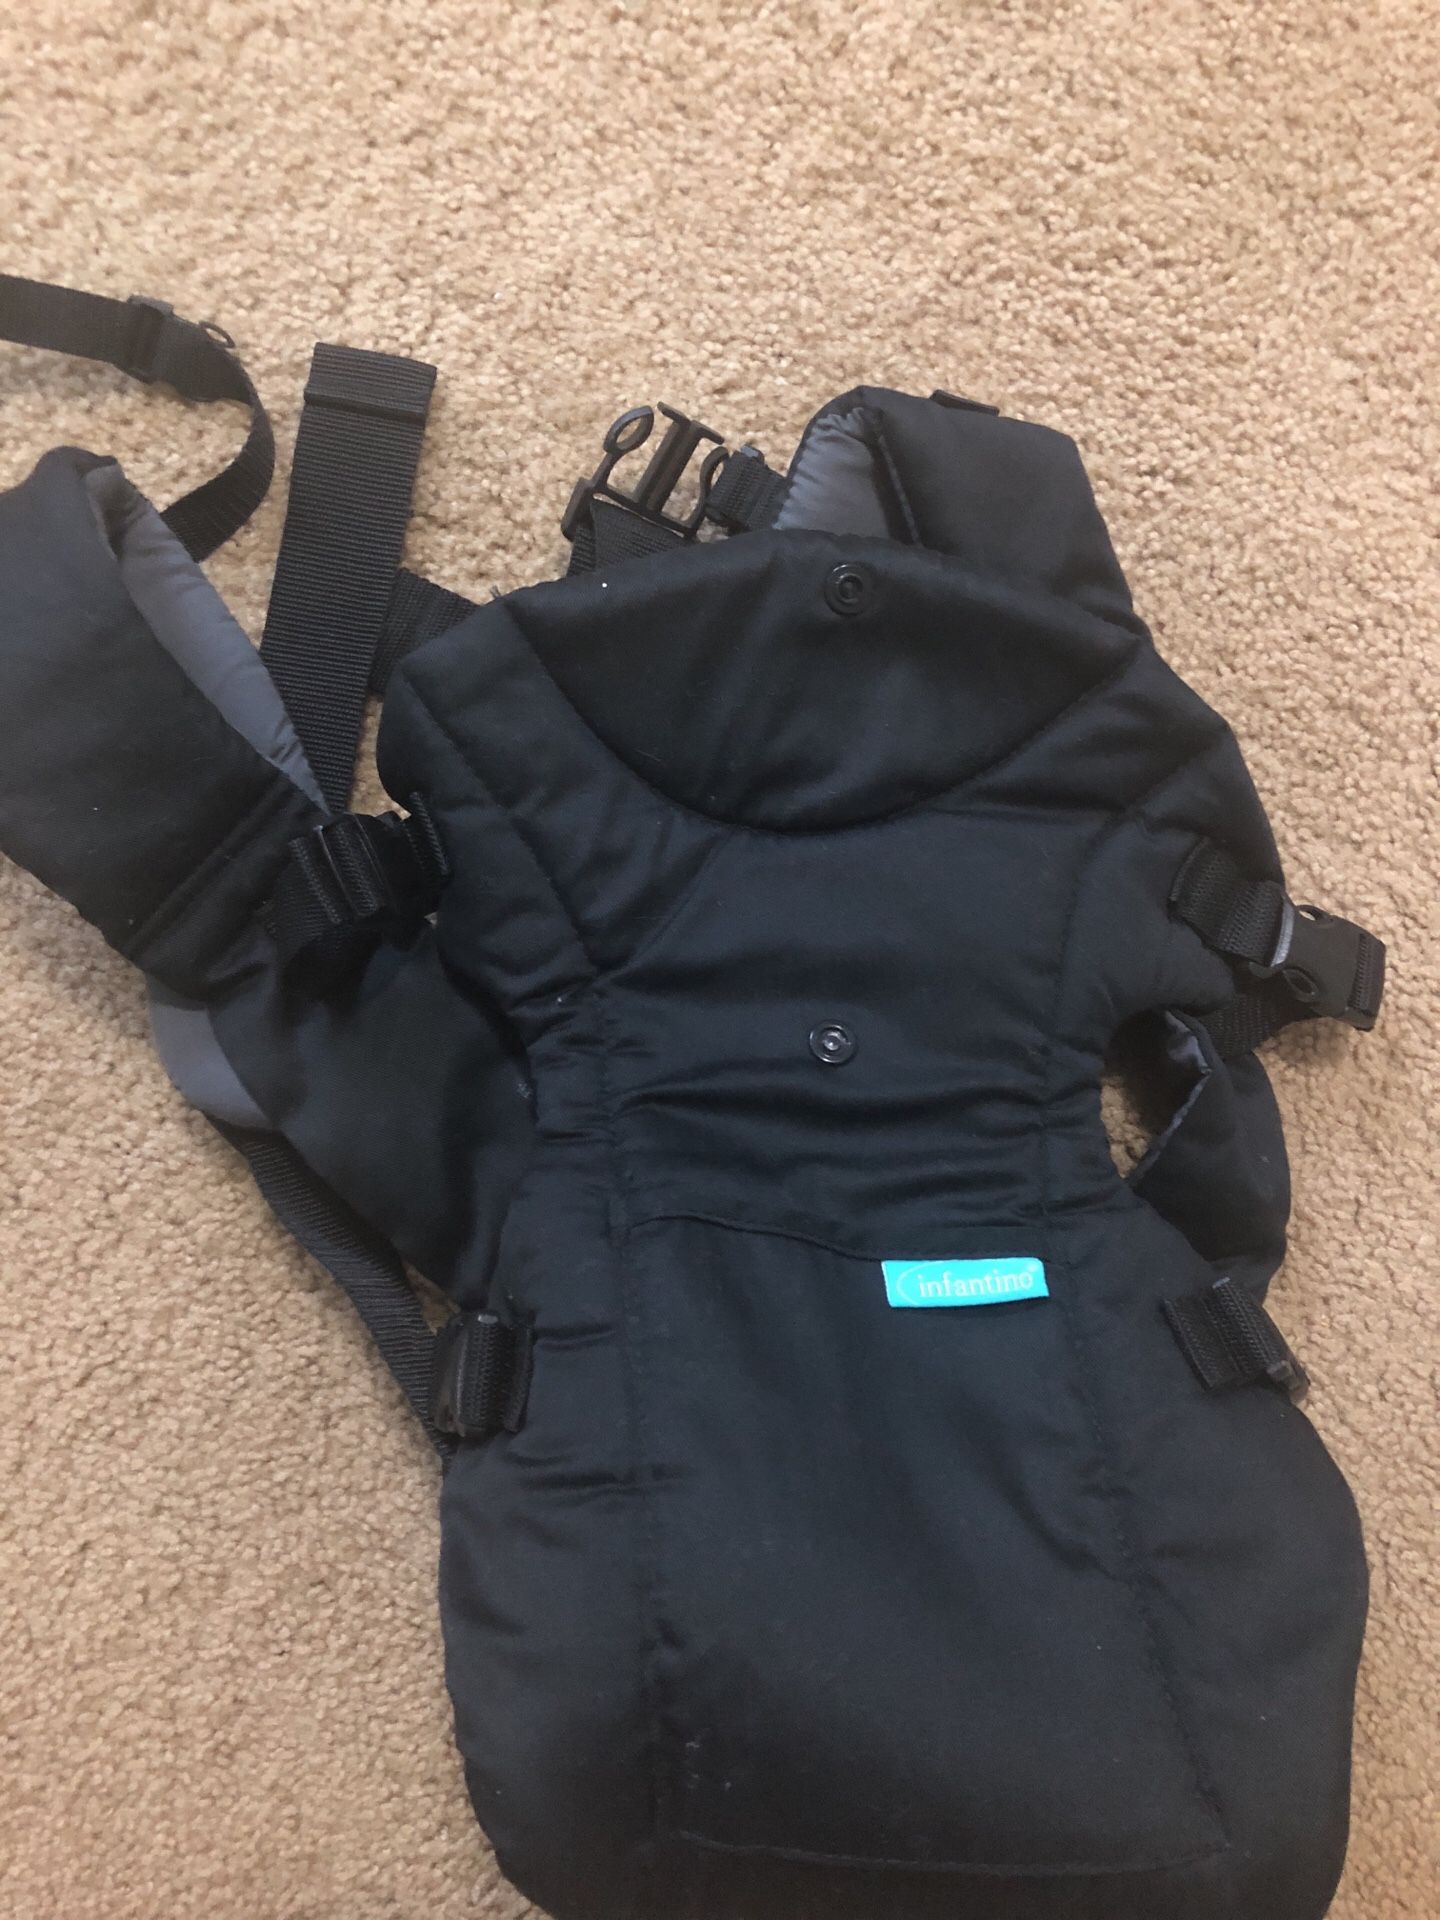 Baby carrier. Barely used